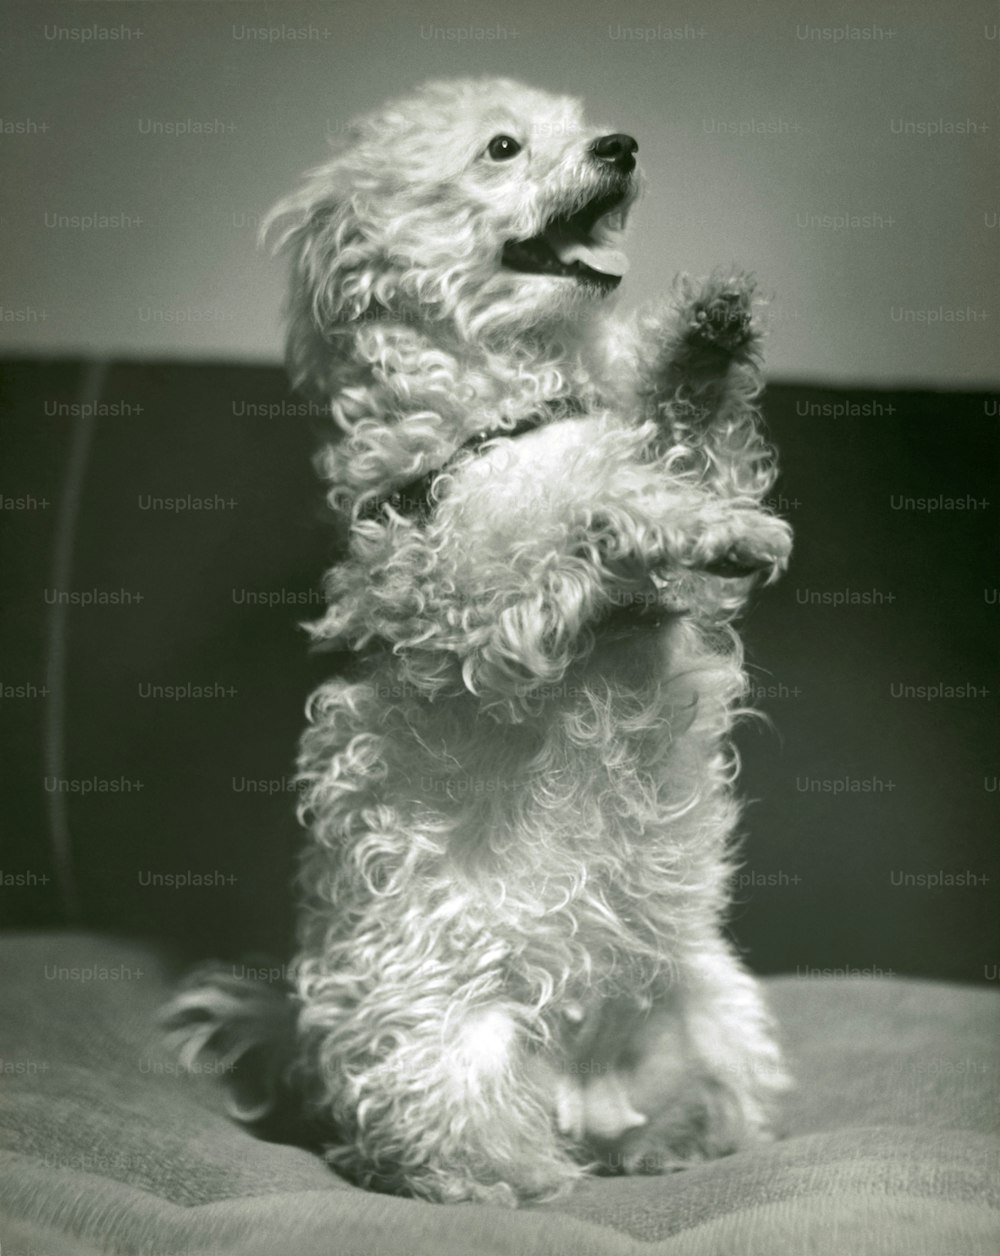 UNITED STATES - CIRCA 1950s:  Dog standing on hind legs.